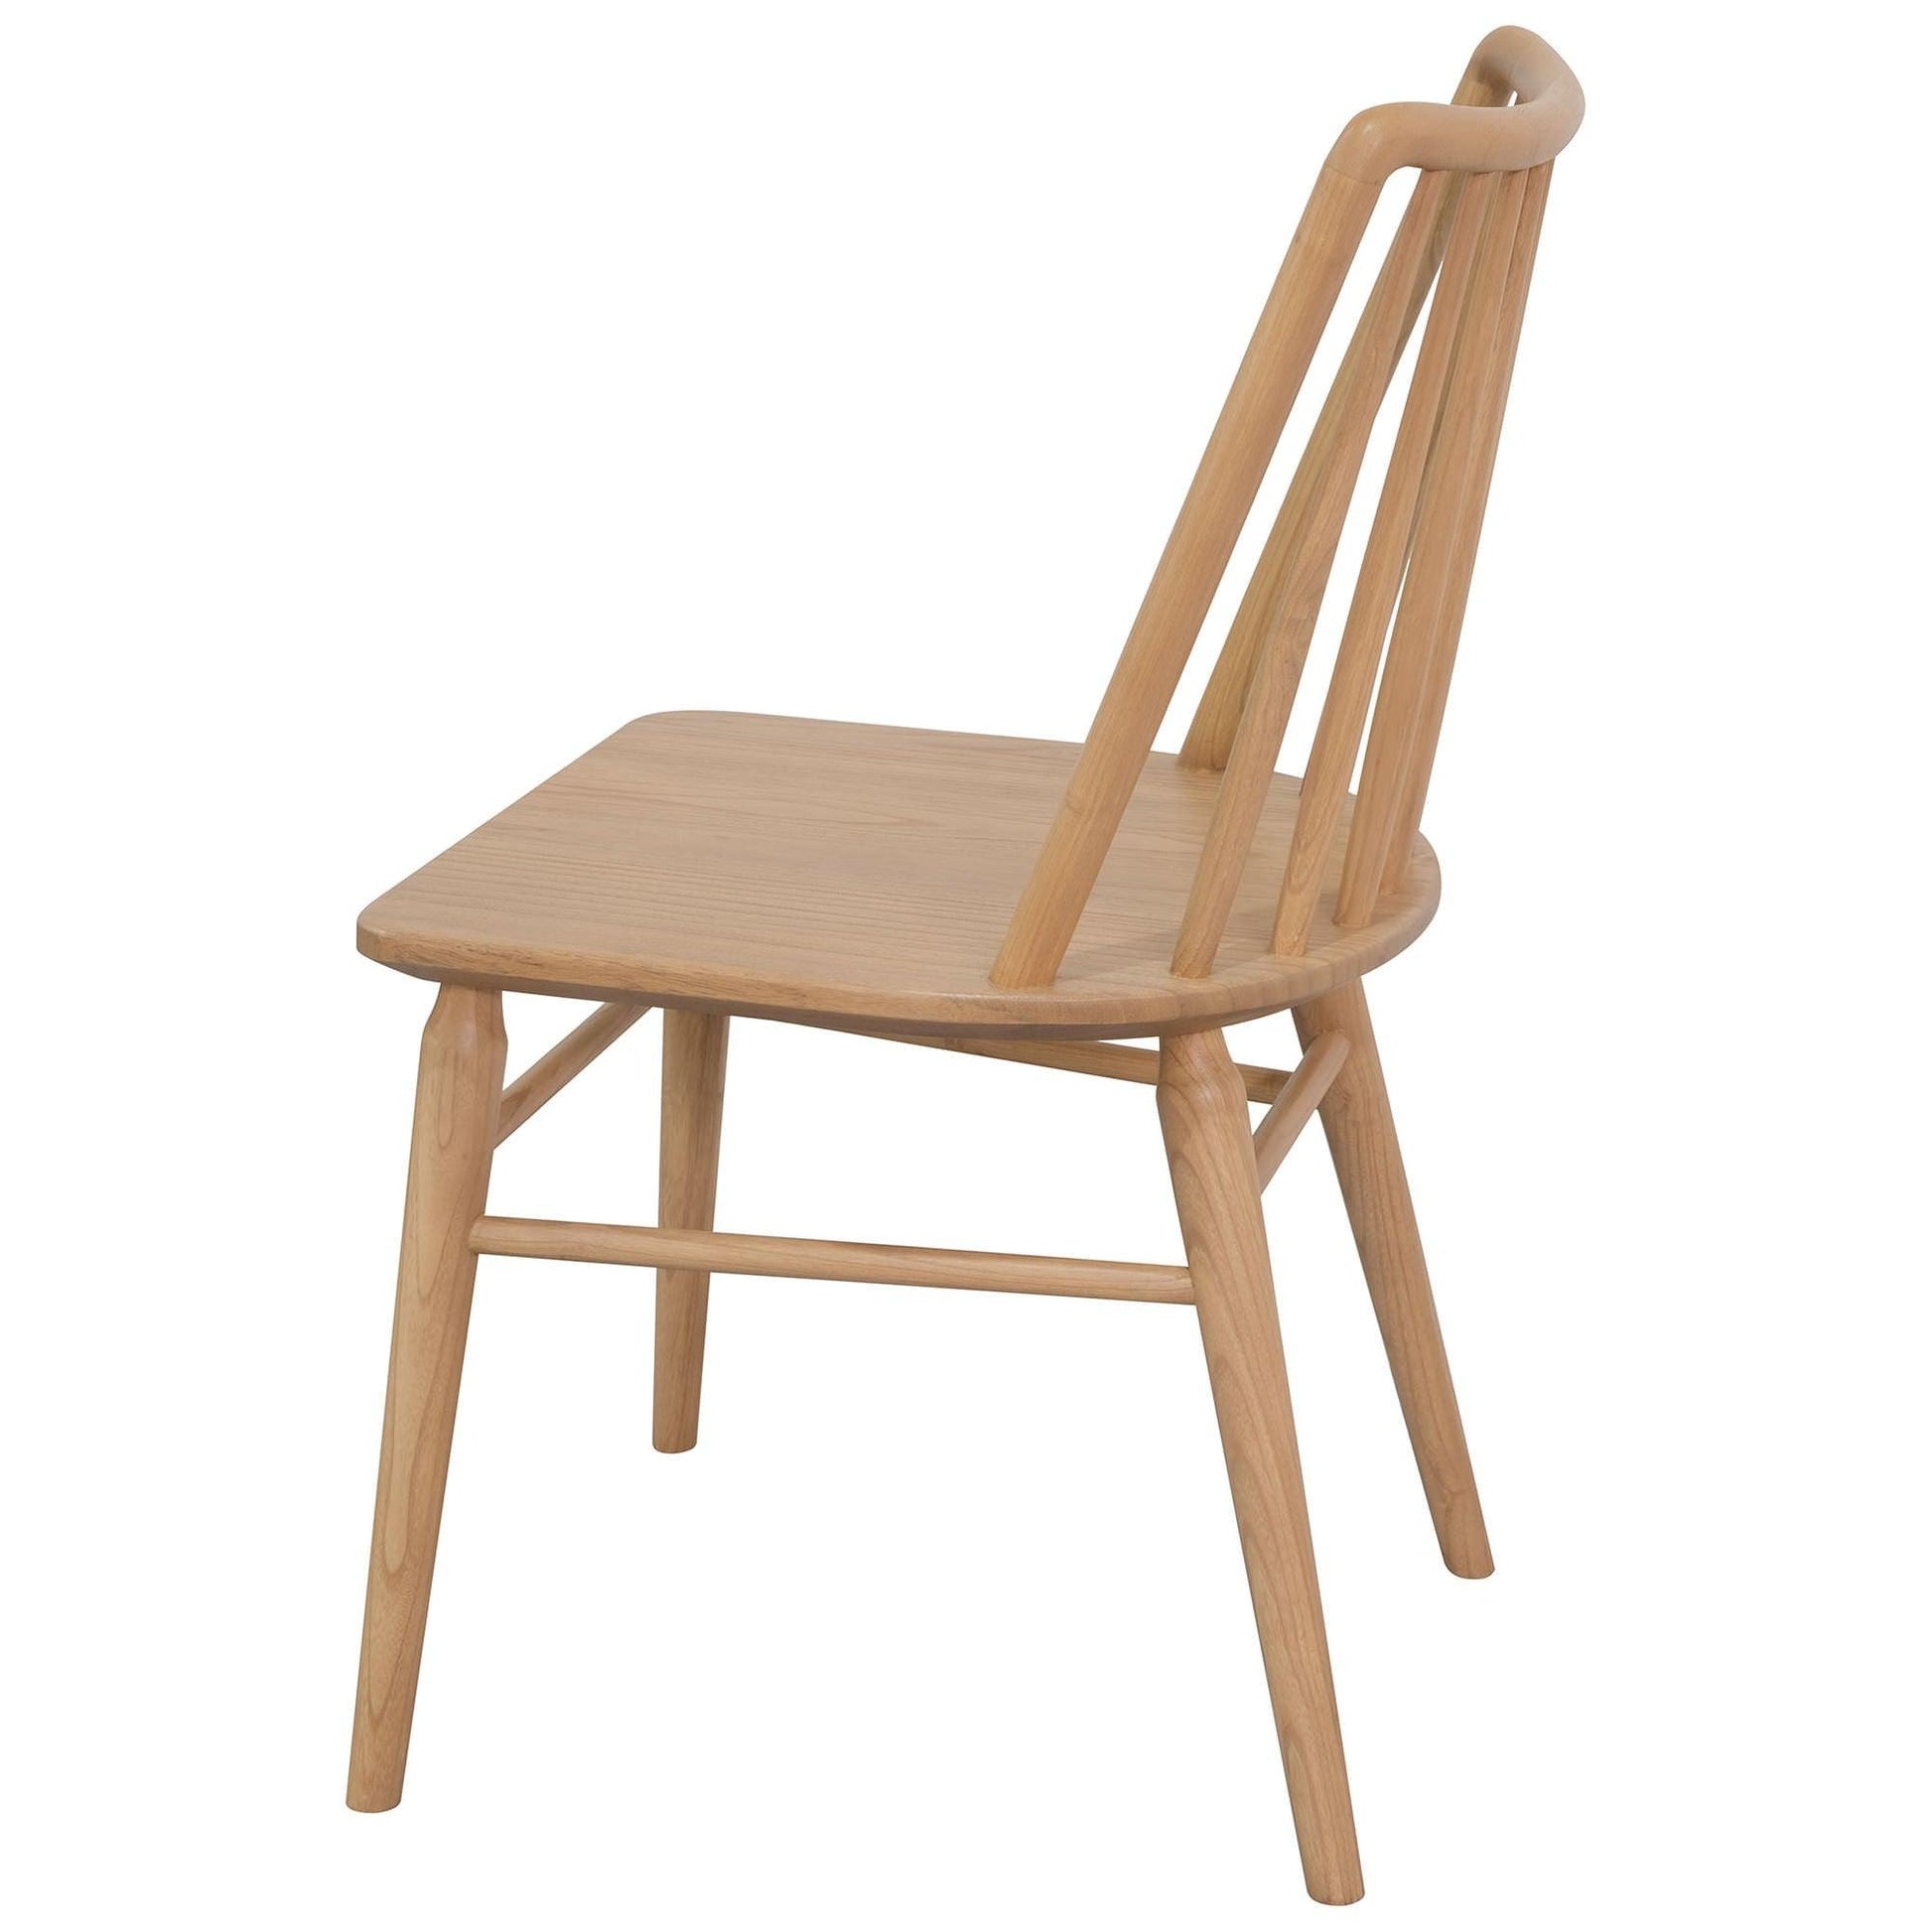 Riviera Solid Oak Dining Chair - Set fo 2 (Natural) - Dining ChairCH 050 RVR Set of 2 (N)754169483524 2